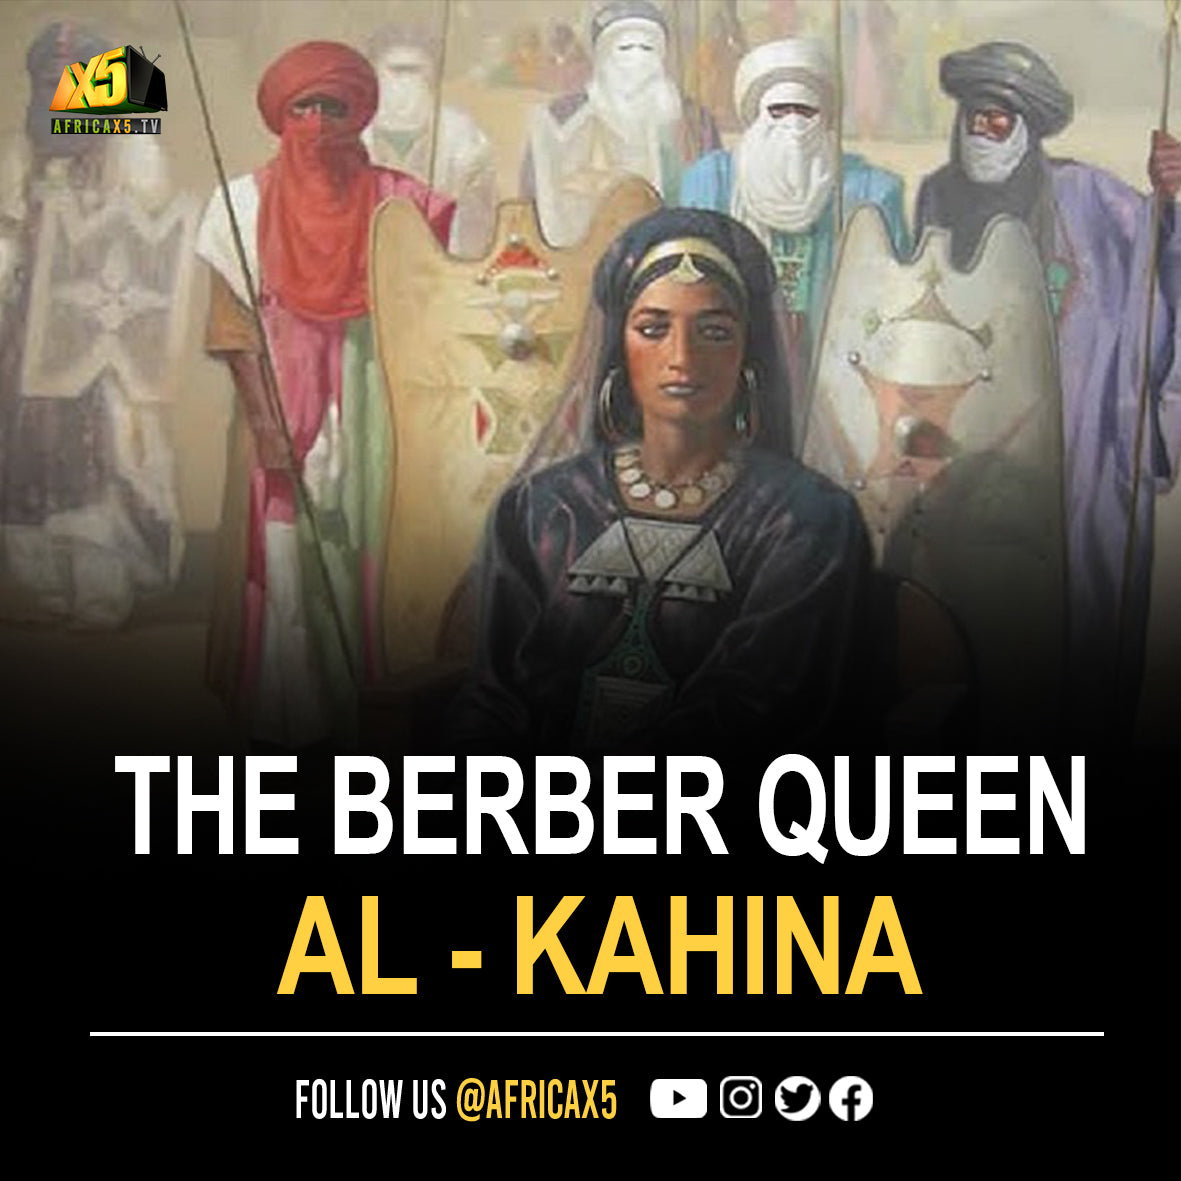 The Berber Queen who defied the Caliphate: Al-Kahina and the Islamic Conquest of North Africa